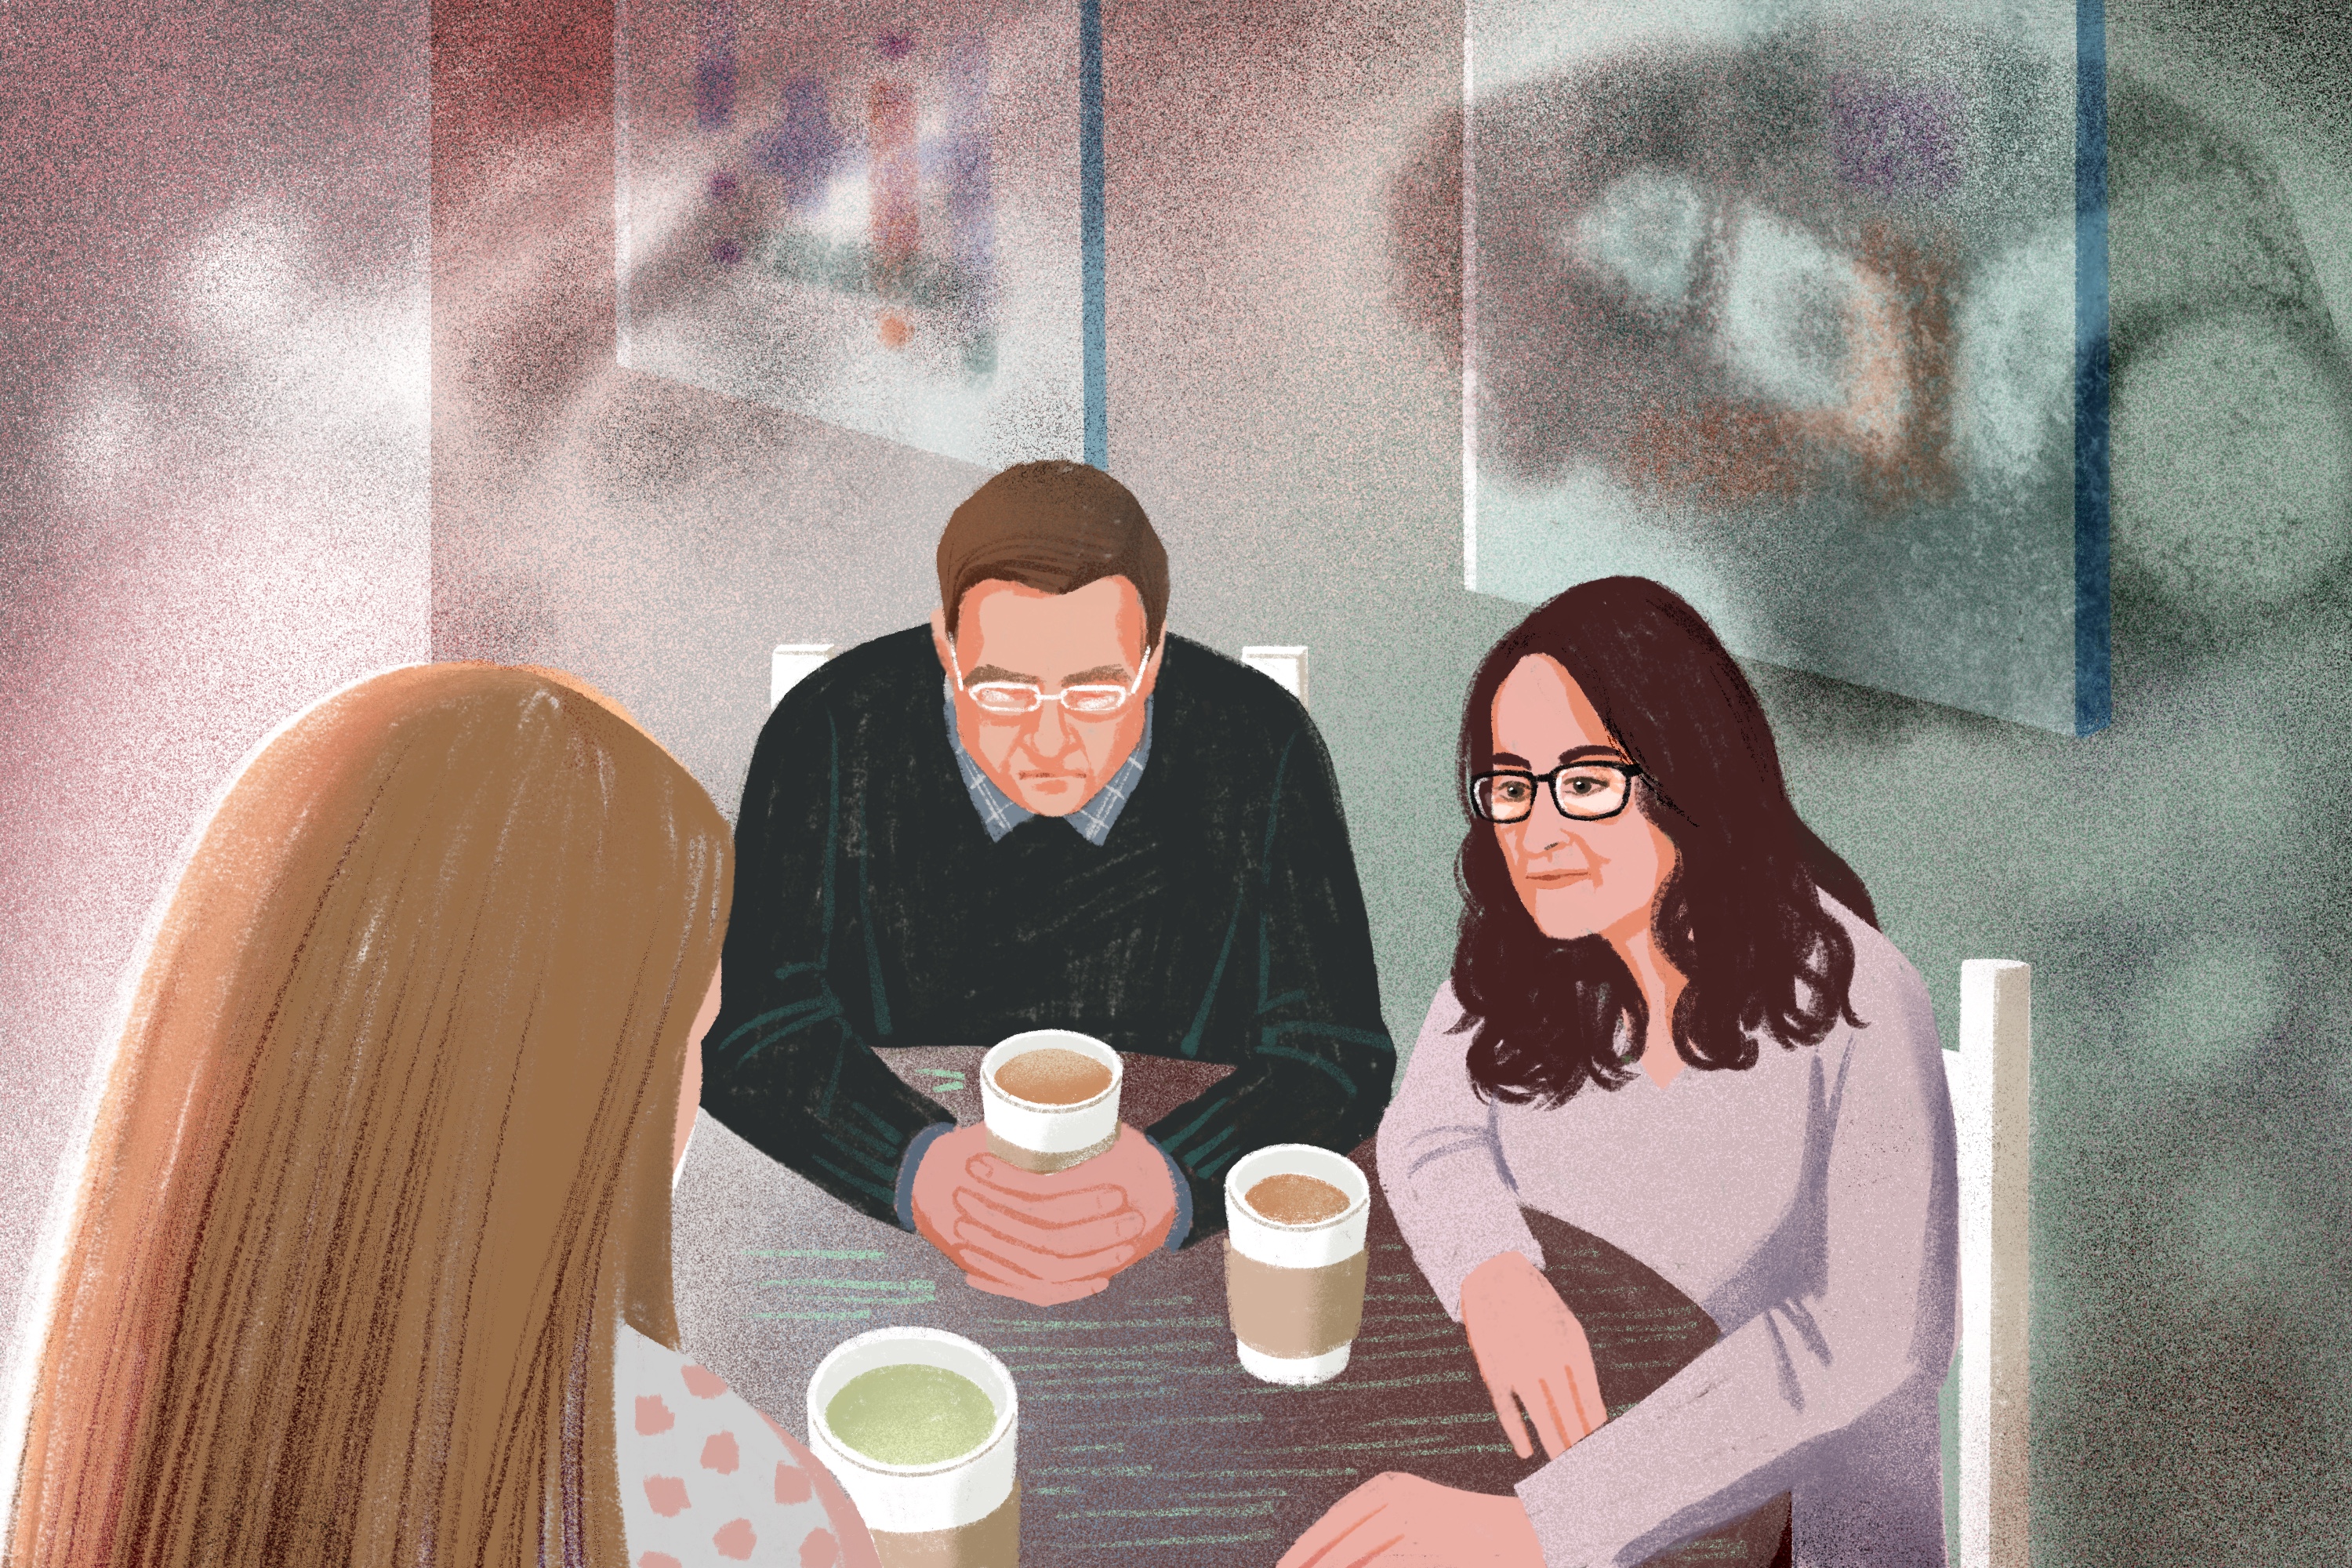 Illustration of two women and one man sitting at a table with disposable coffee cups in front of them. We see the back of one woman's head and the other woman leans forward to hold her hand. A hazy image of a Jeep floats in the background.